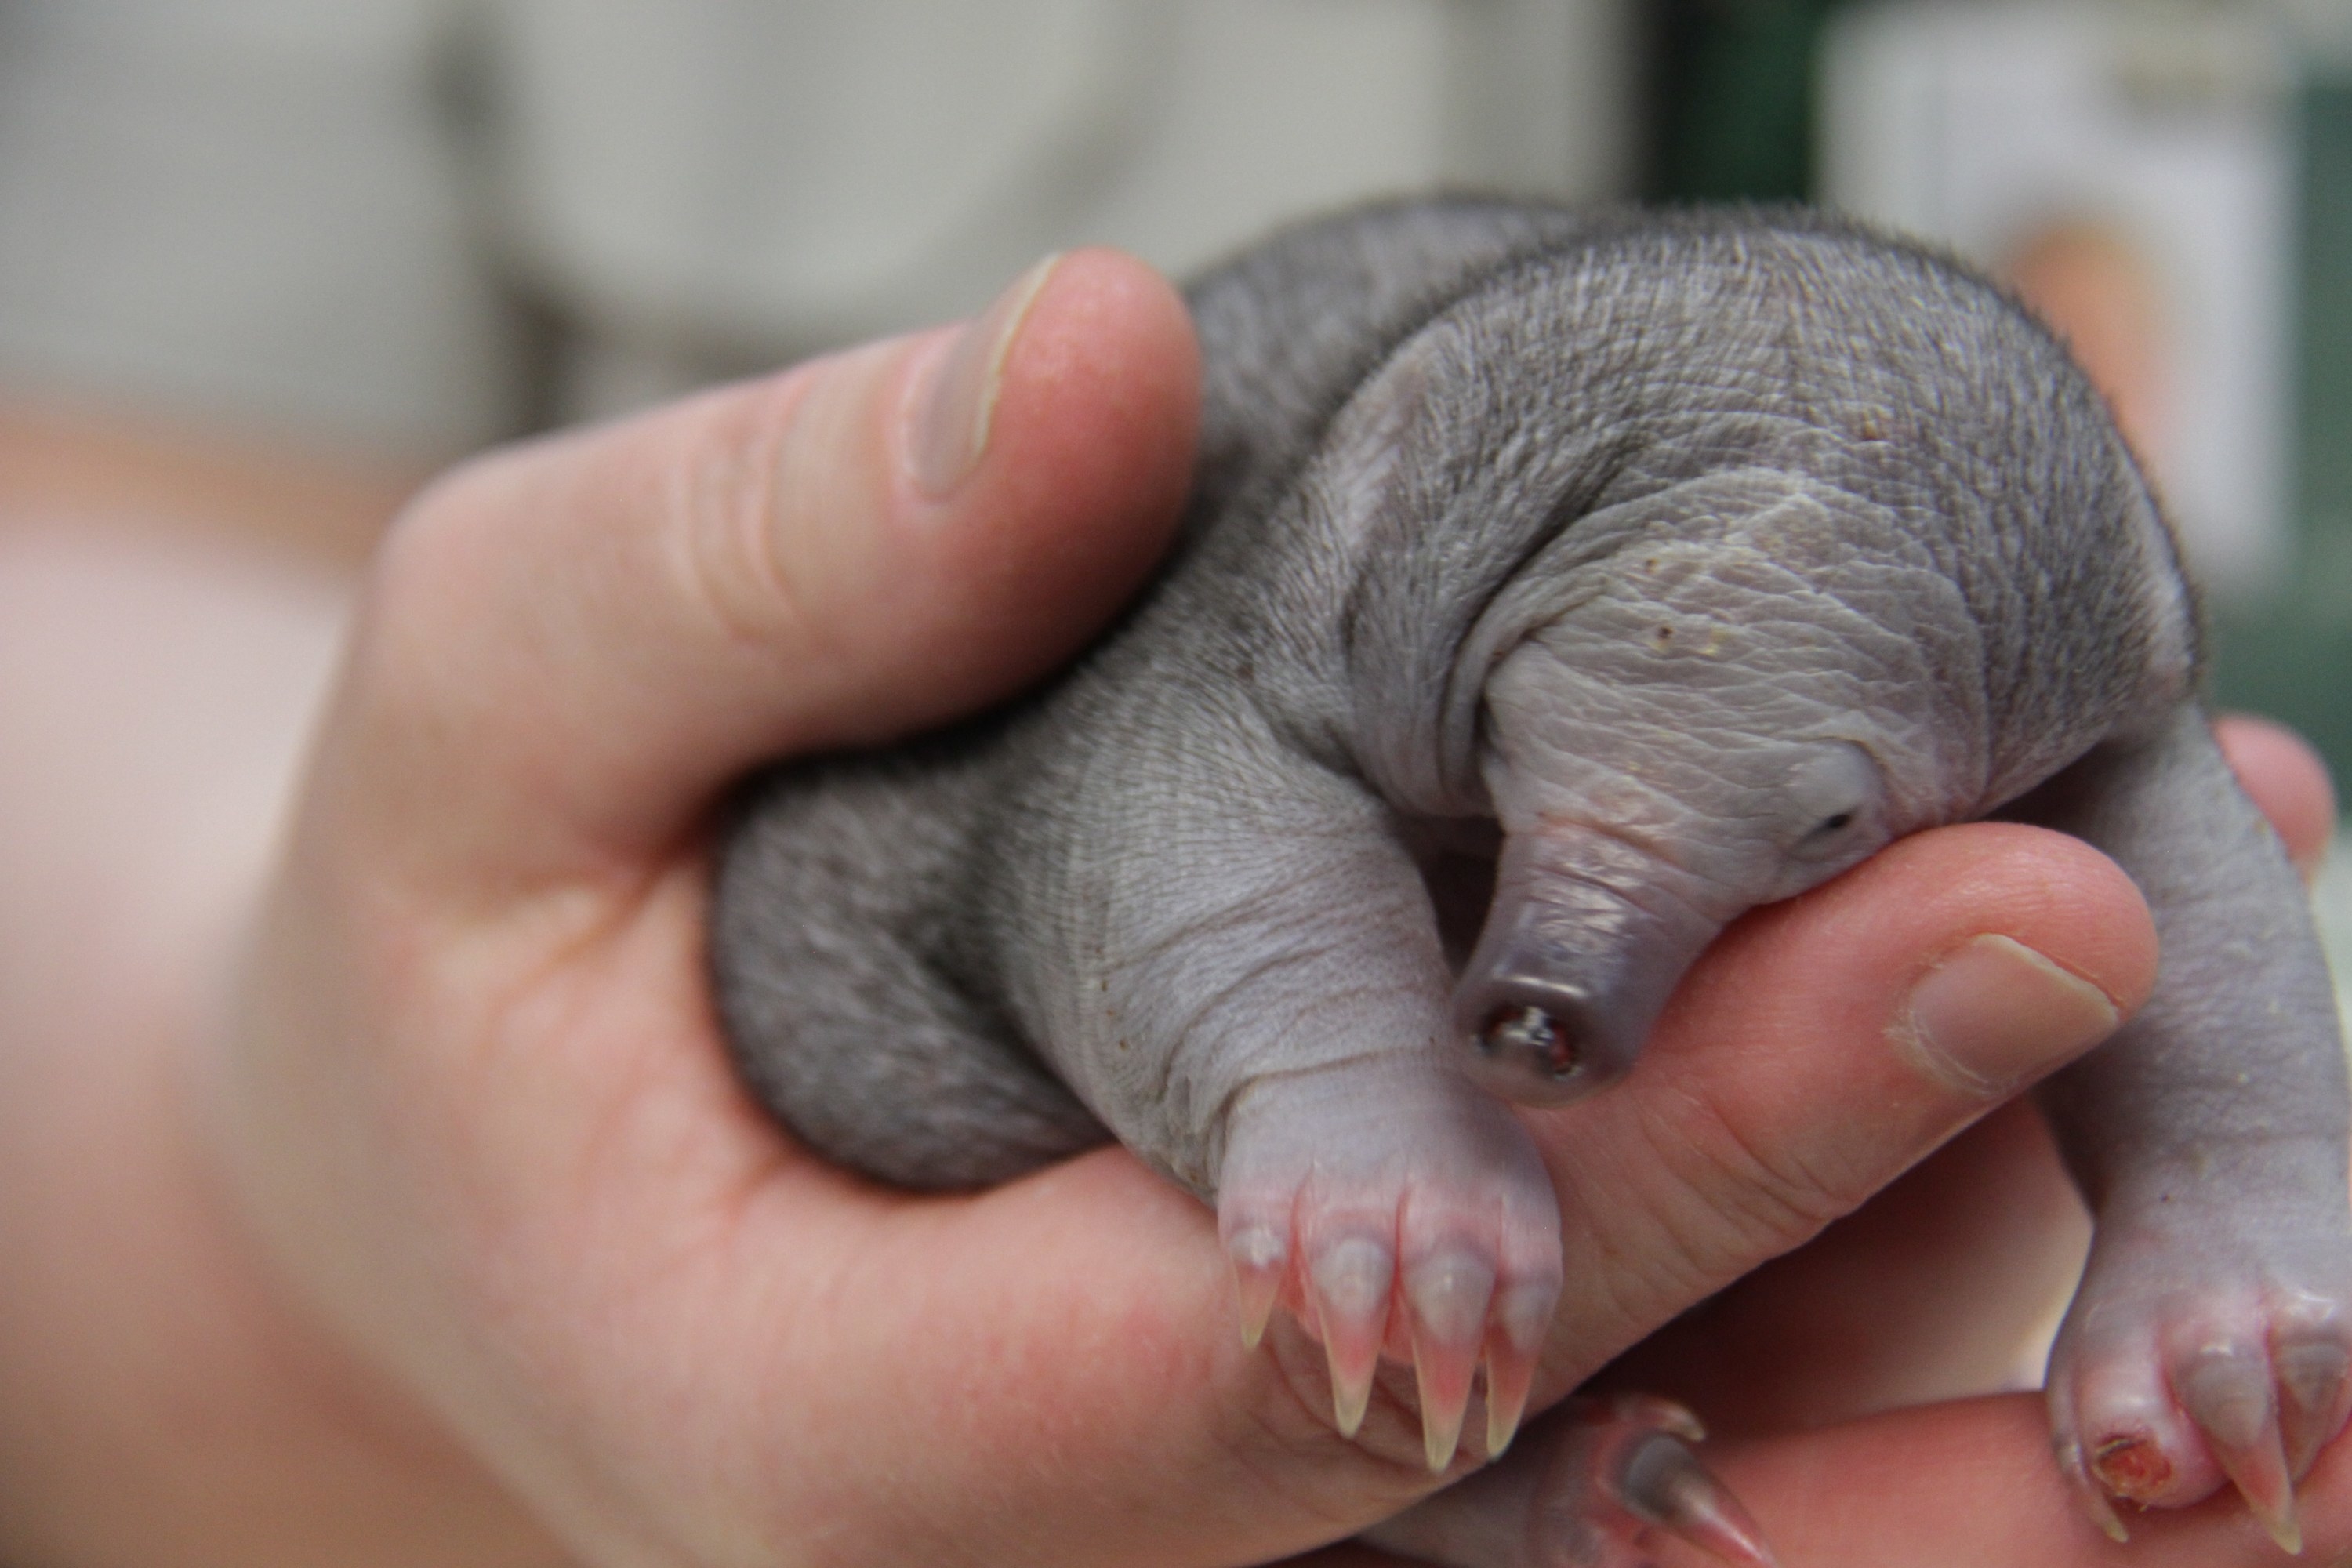 Puggle curling up in the hands of a keeper, resting its body on the thumb and pointer finger